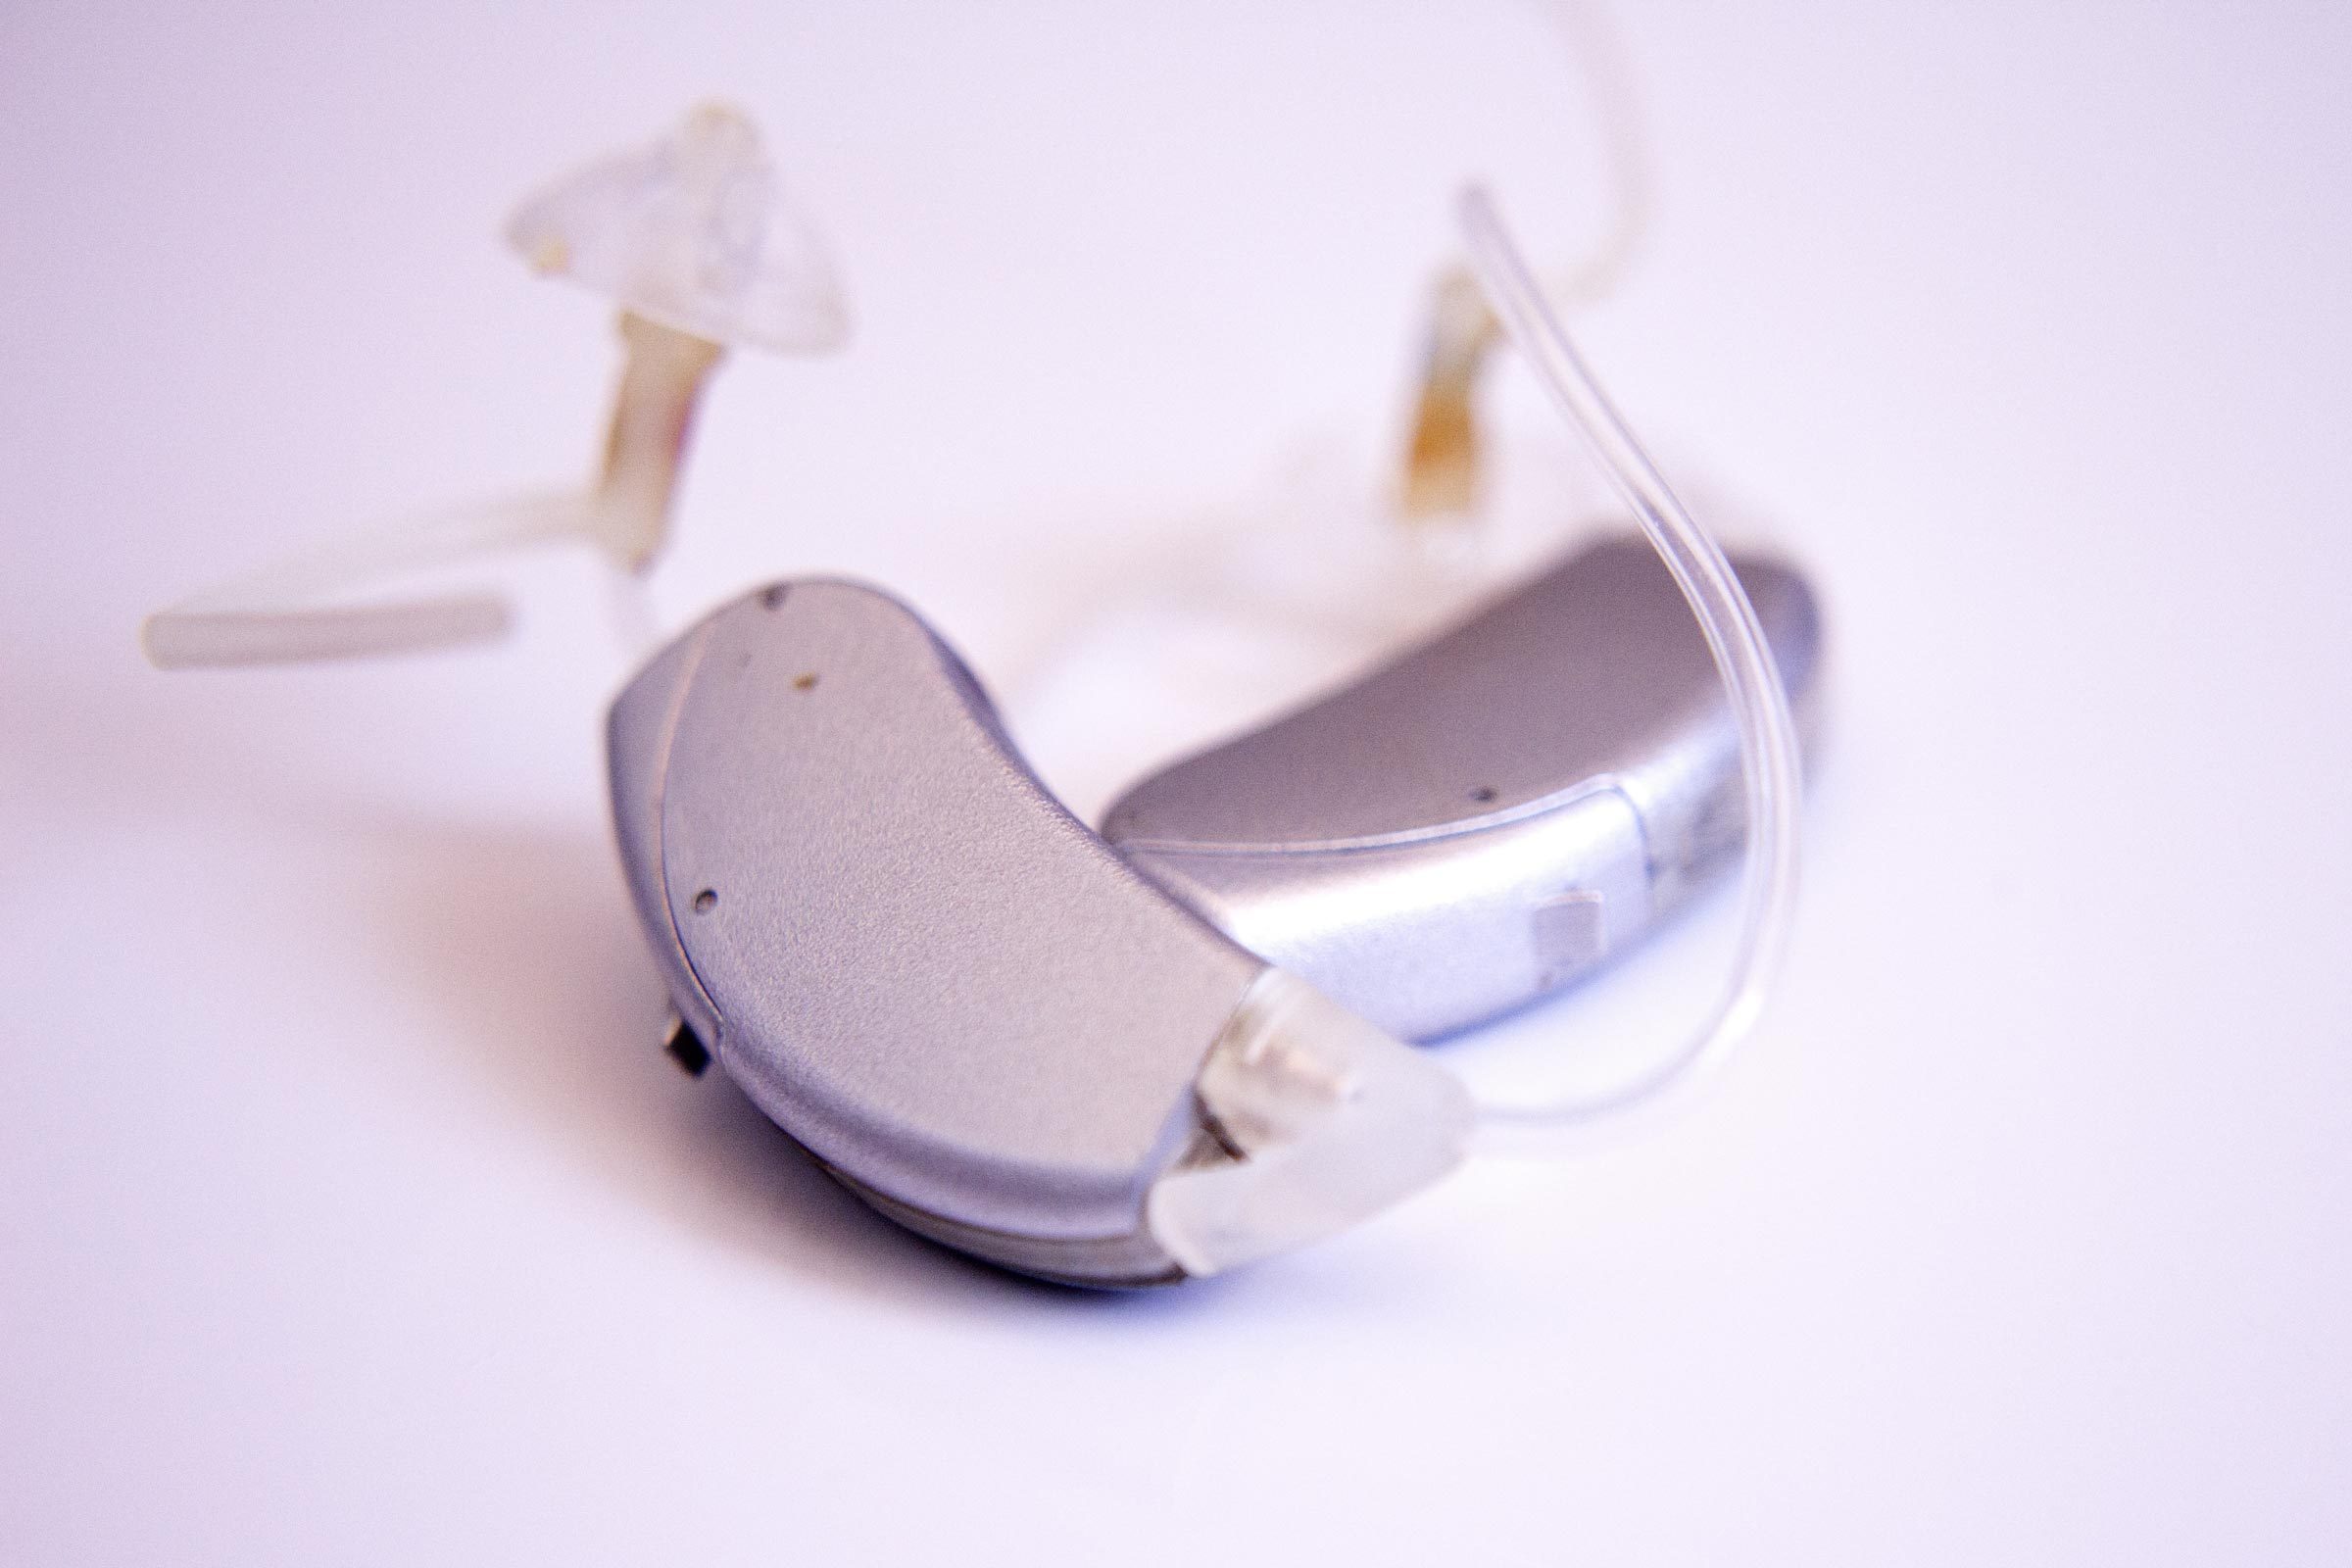 Hearing Aid Accessibility: A Mother's 25-Year FDA Fight, and What Needs to Happen Next